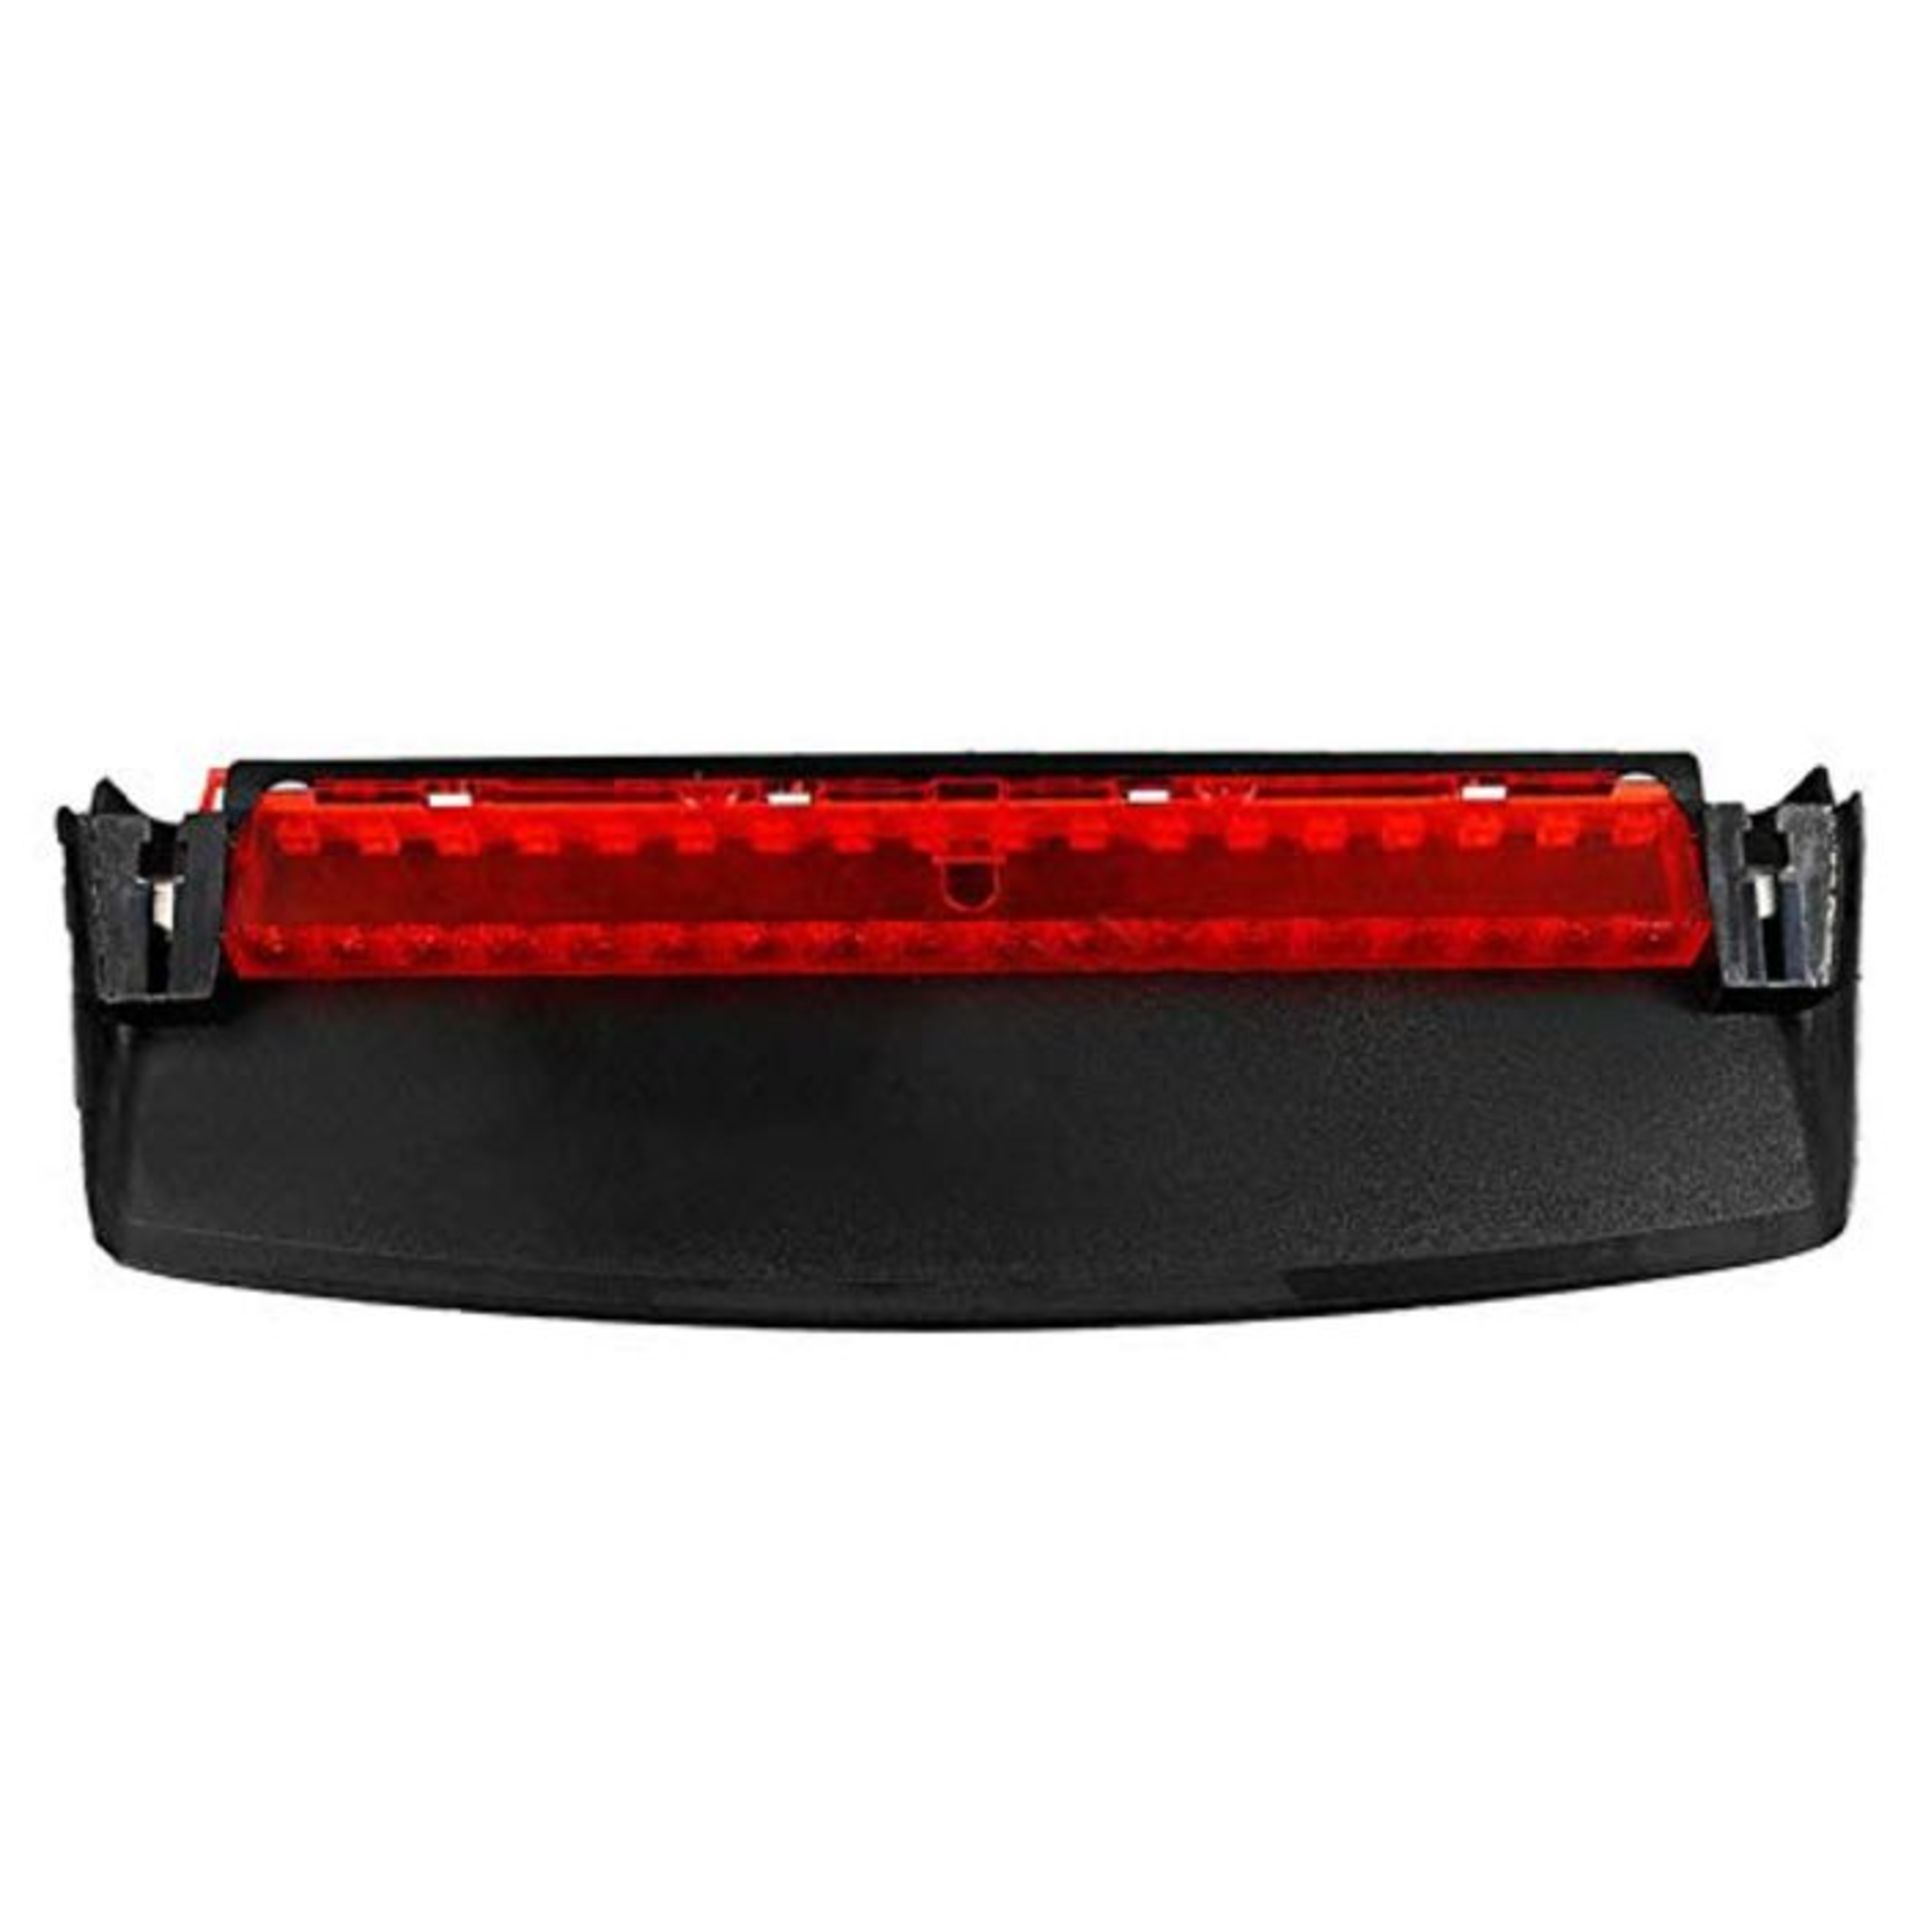 Third Brake Light, Red Lens LED Central High Parking Light Replacement For A-udi A4 B8